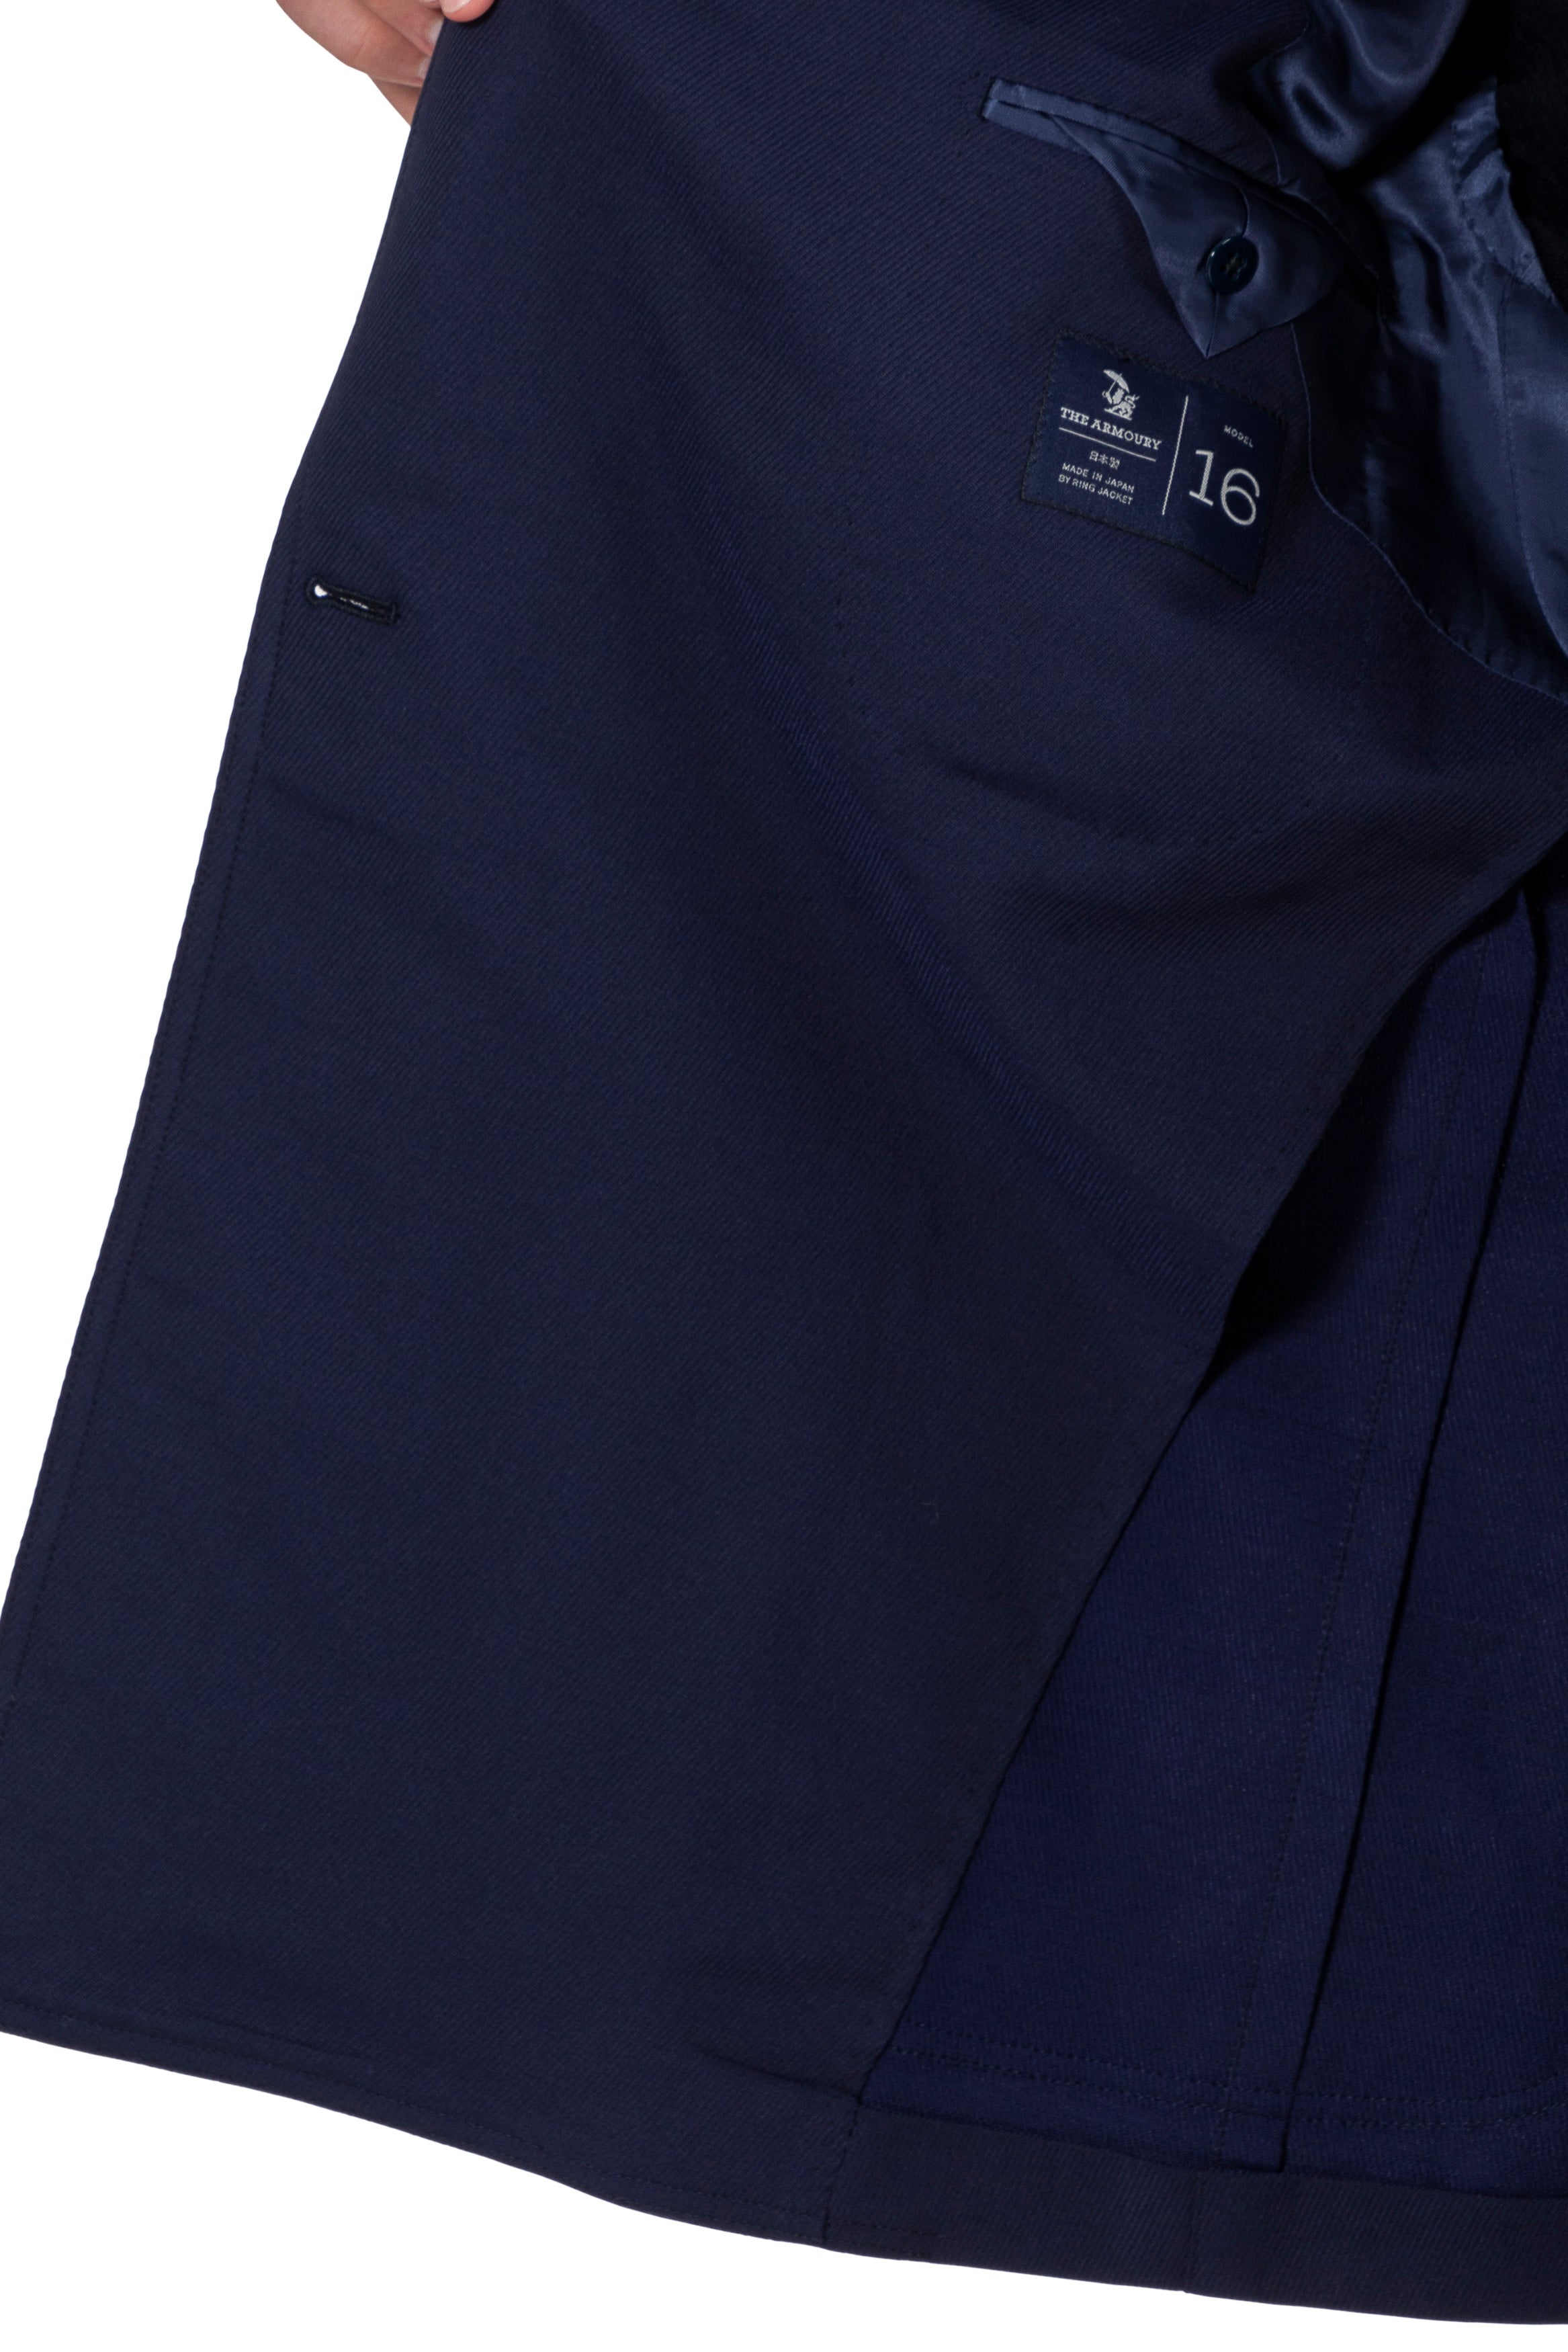 The Armoury Model 16B Navy Wool Cotton Twill DB Suit